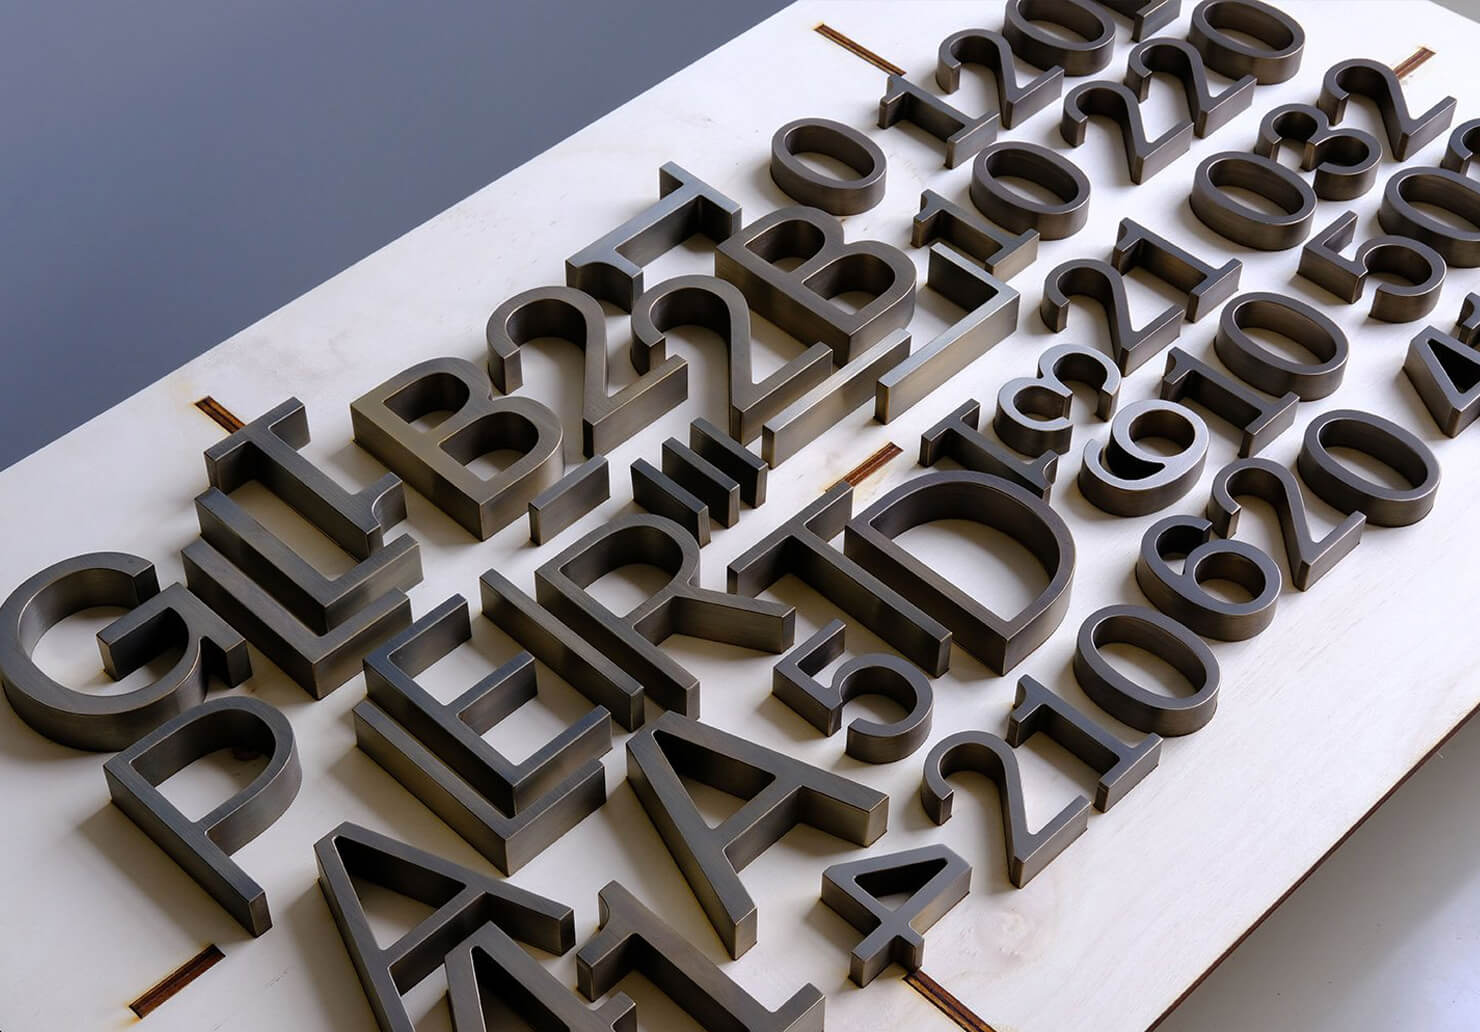 fabricated-metal-letters-artwork-03